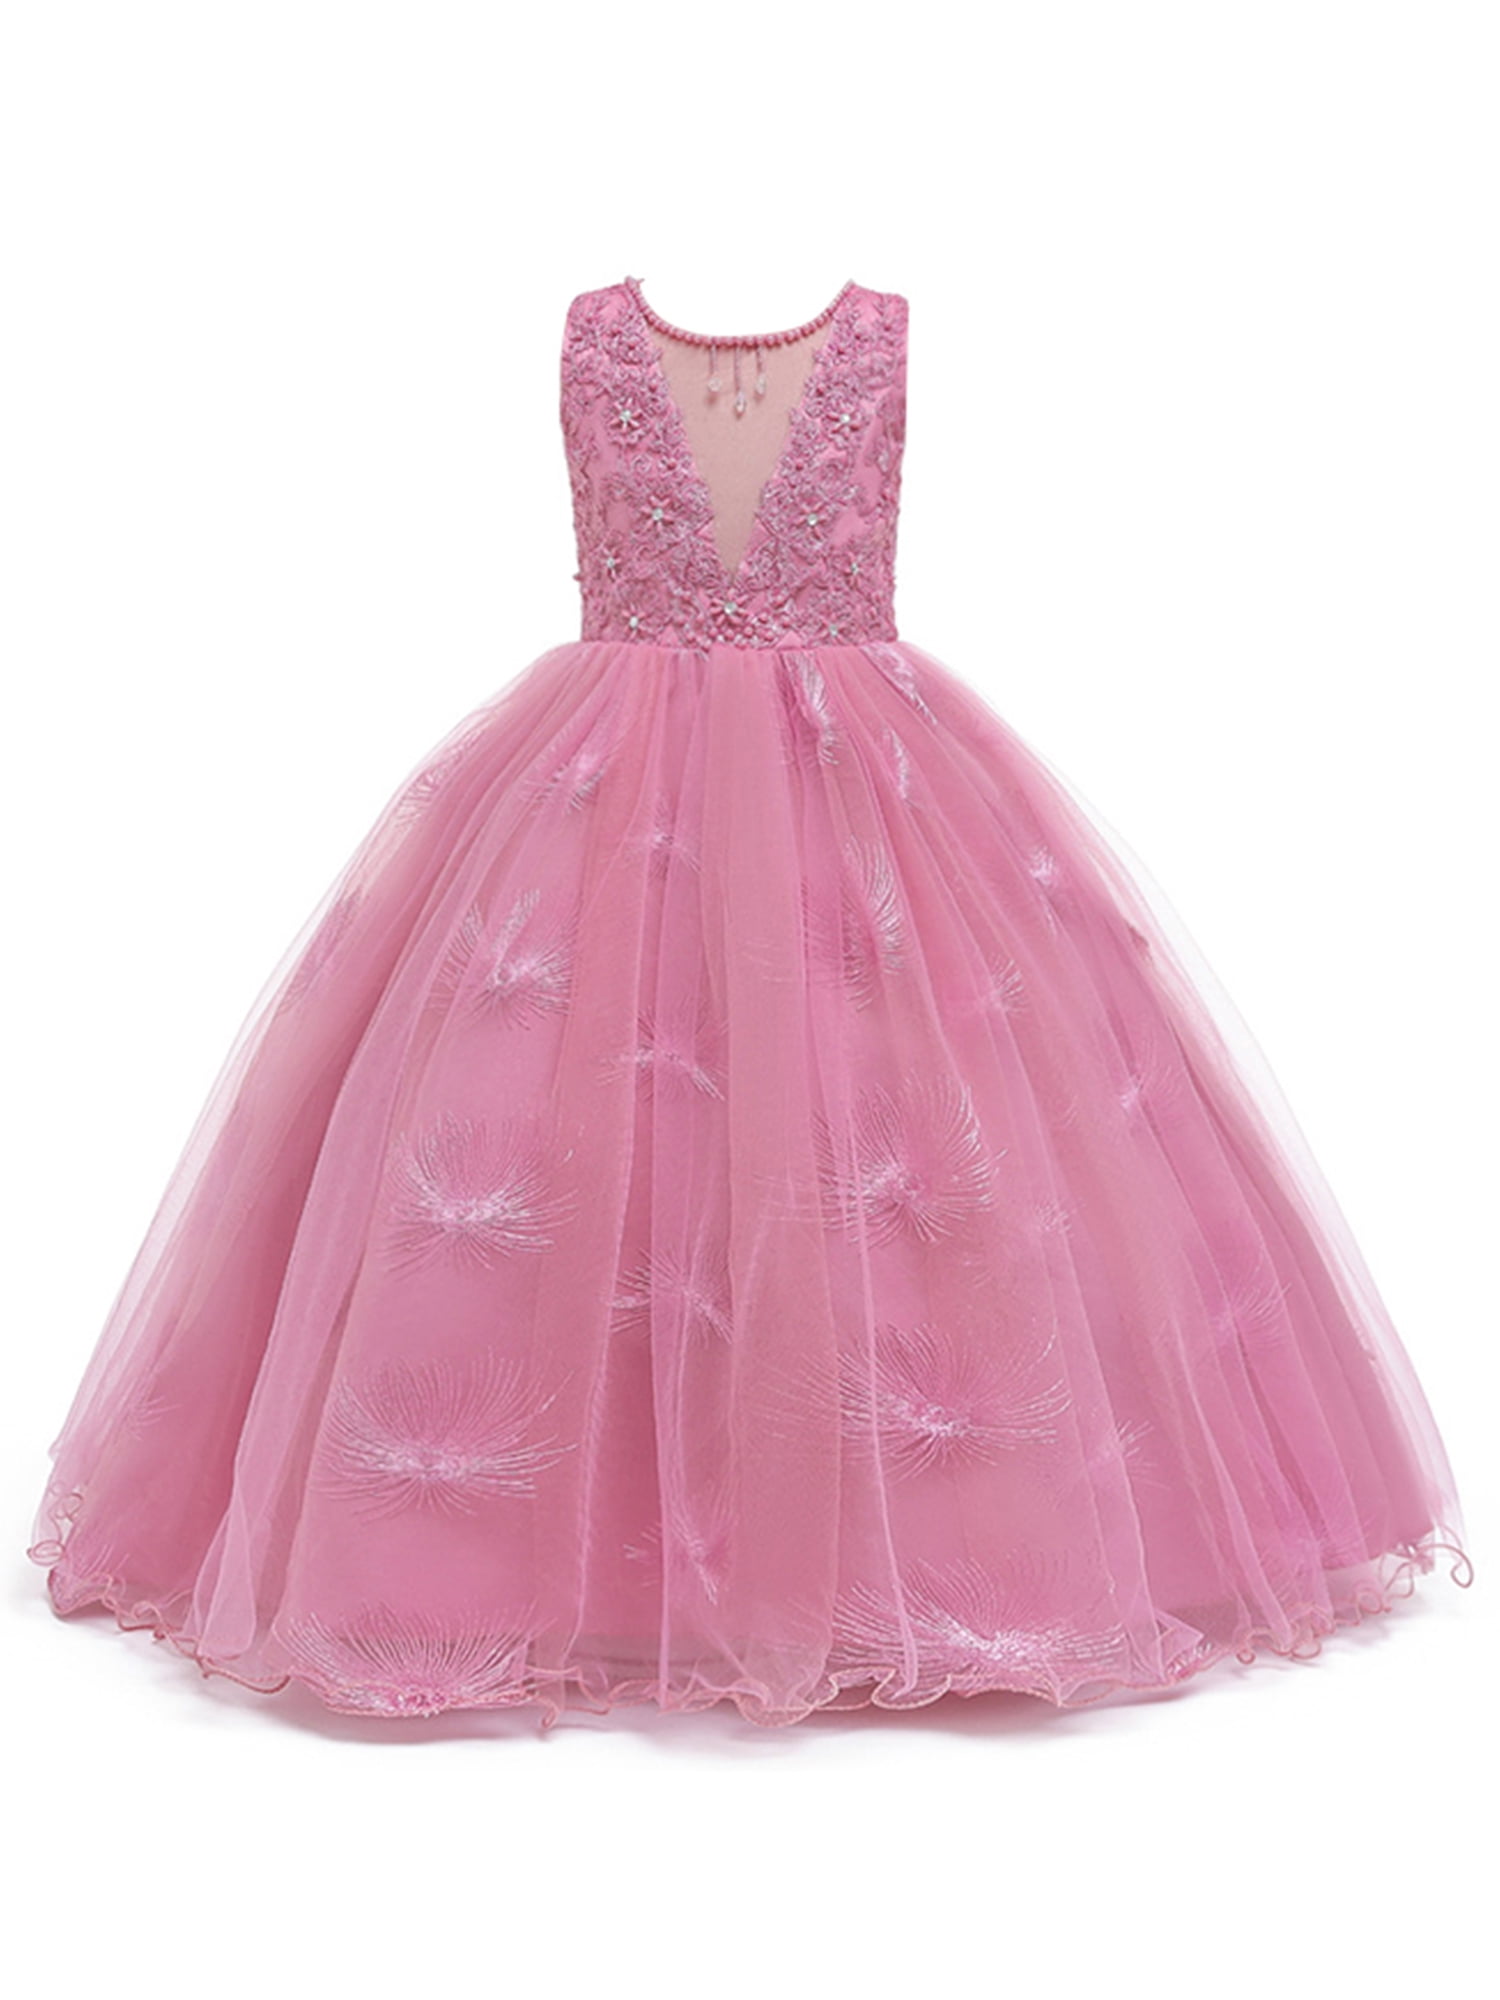 Toddler Girls Party Formal Dress Princess Long Maxi Pageant Wedding Flower Gown 